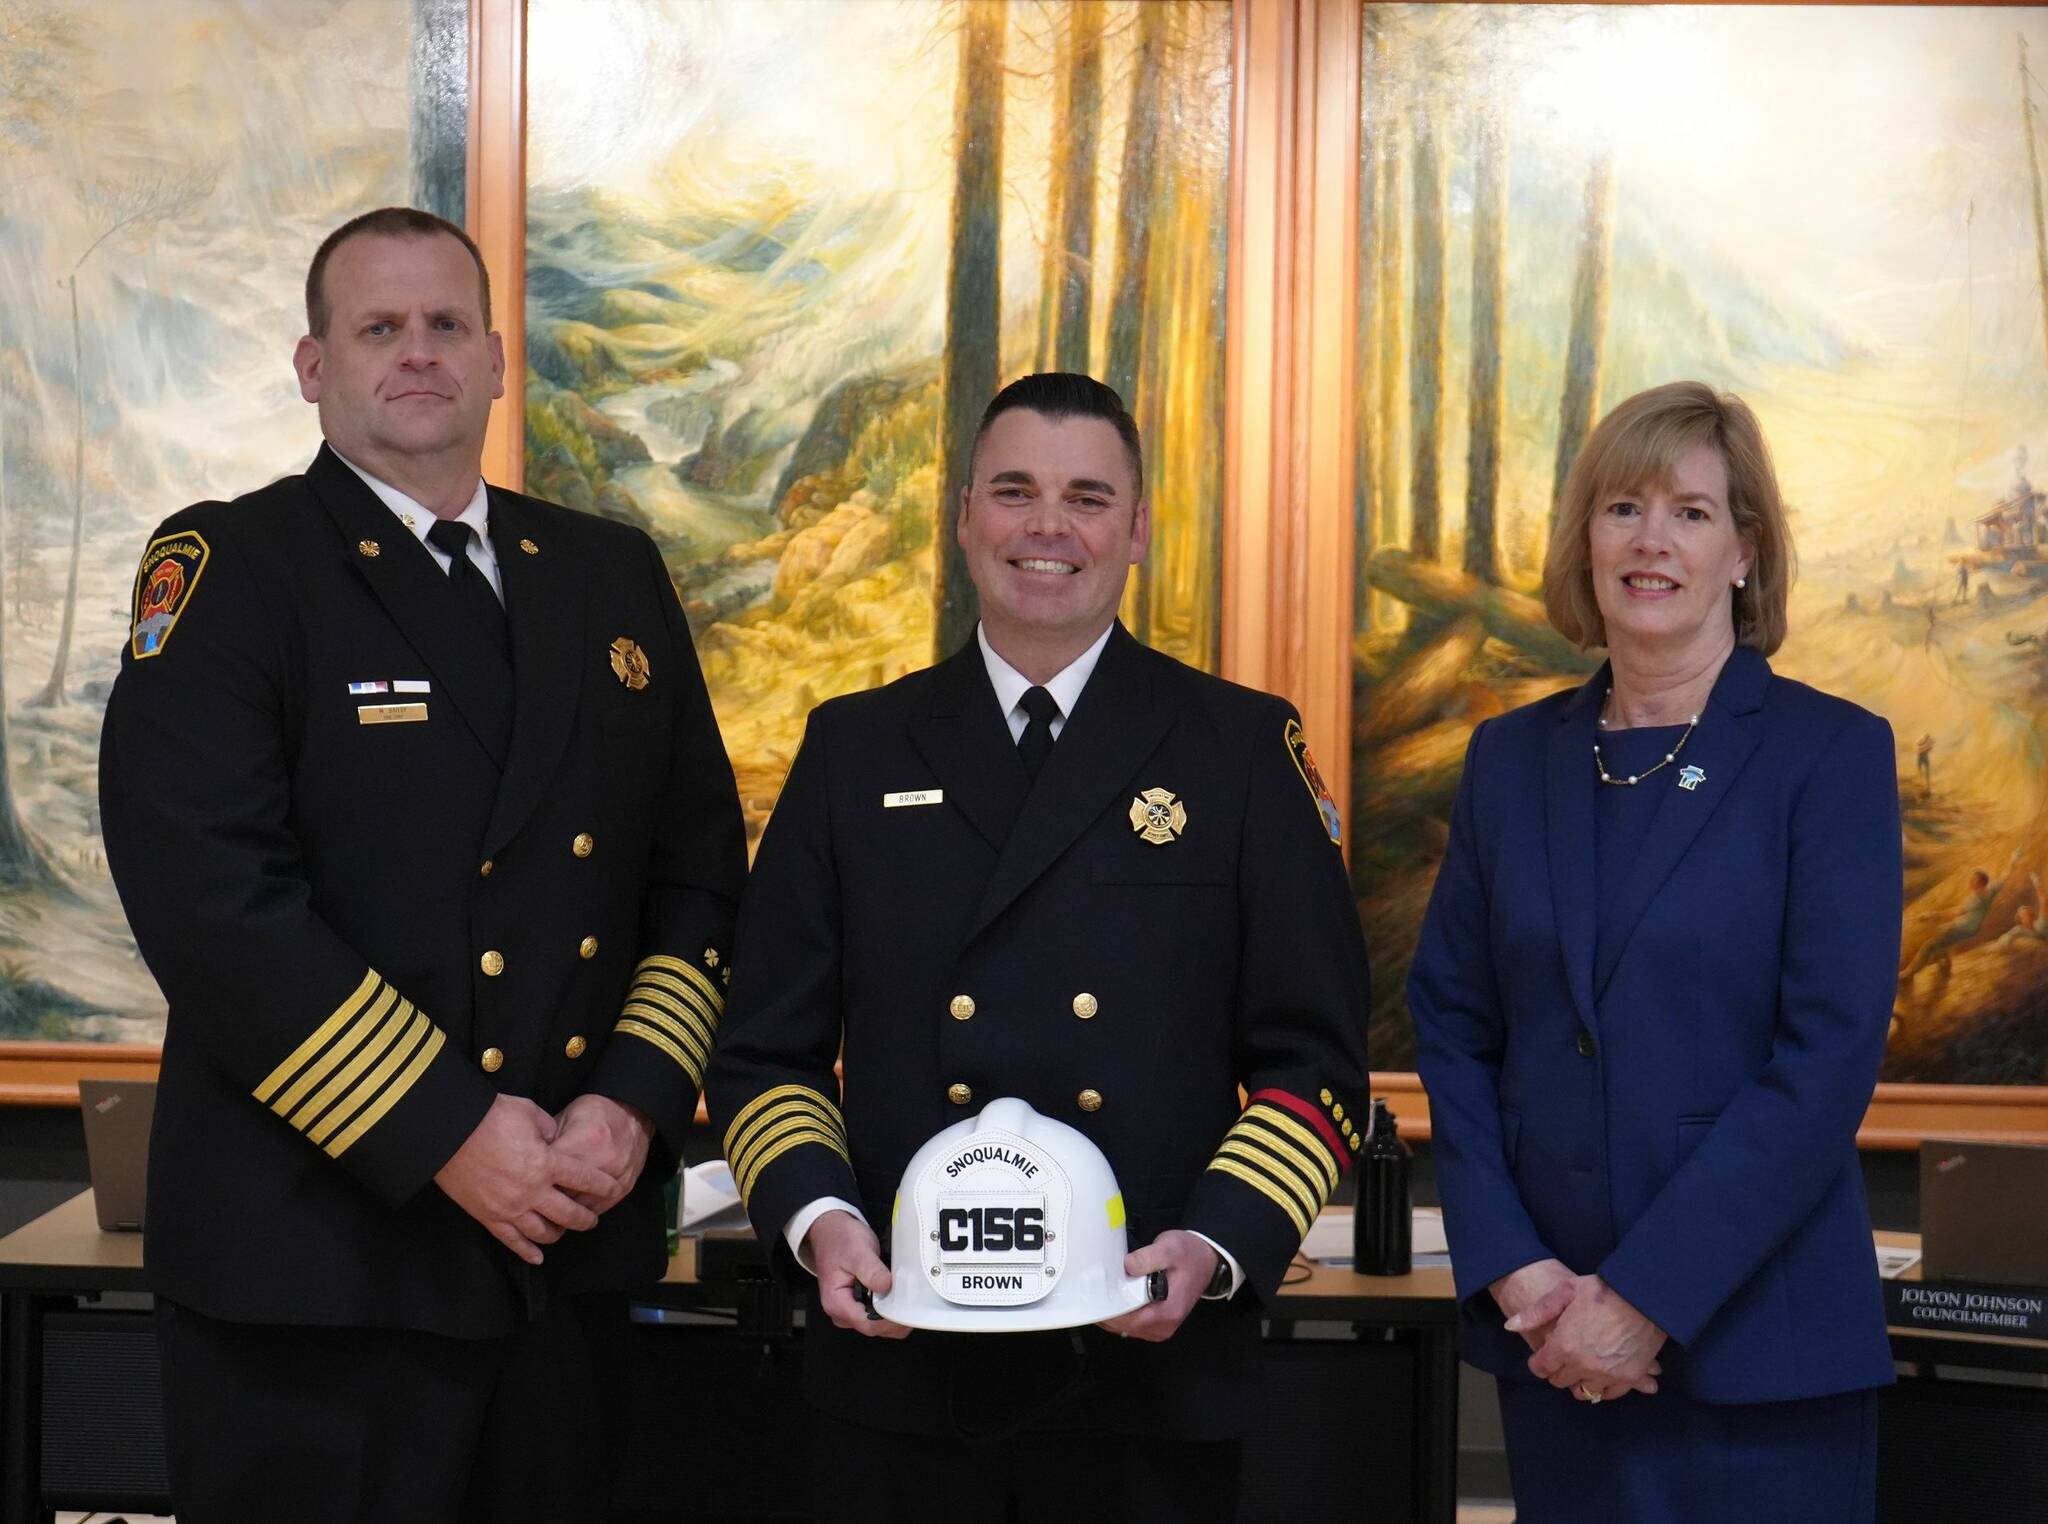 Fire Chief Mike Bailey (left), Dep. Chief Chris Brown (middle) and Snoqualmie Mayor Katherine Ross (right). (Photo courtesy of the city of Snoqualmie)